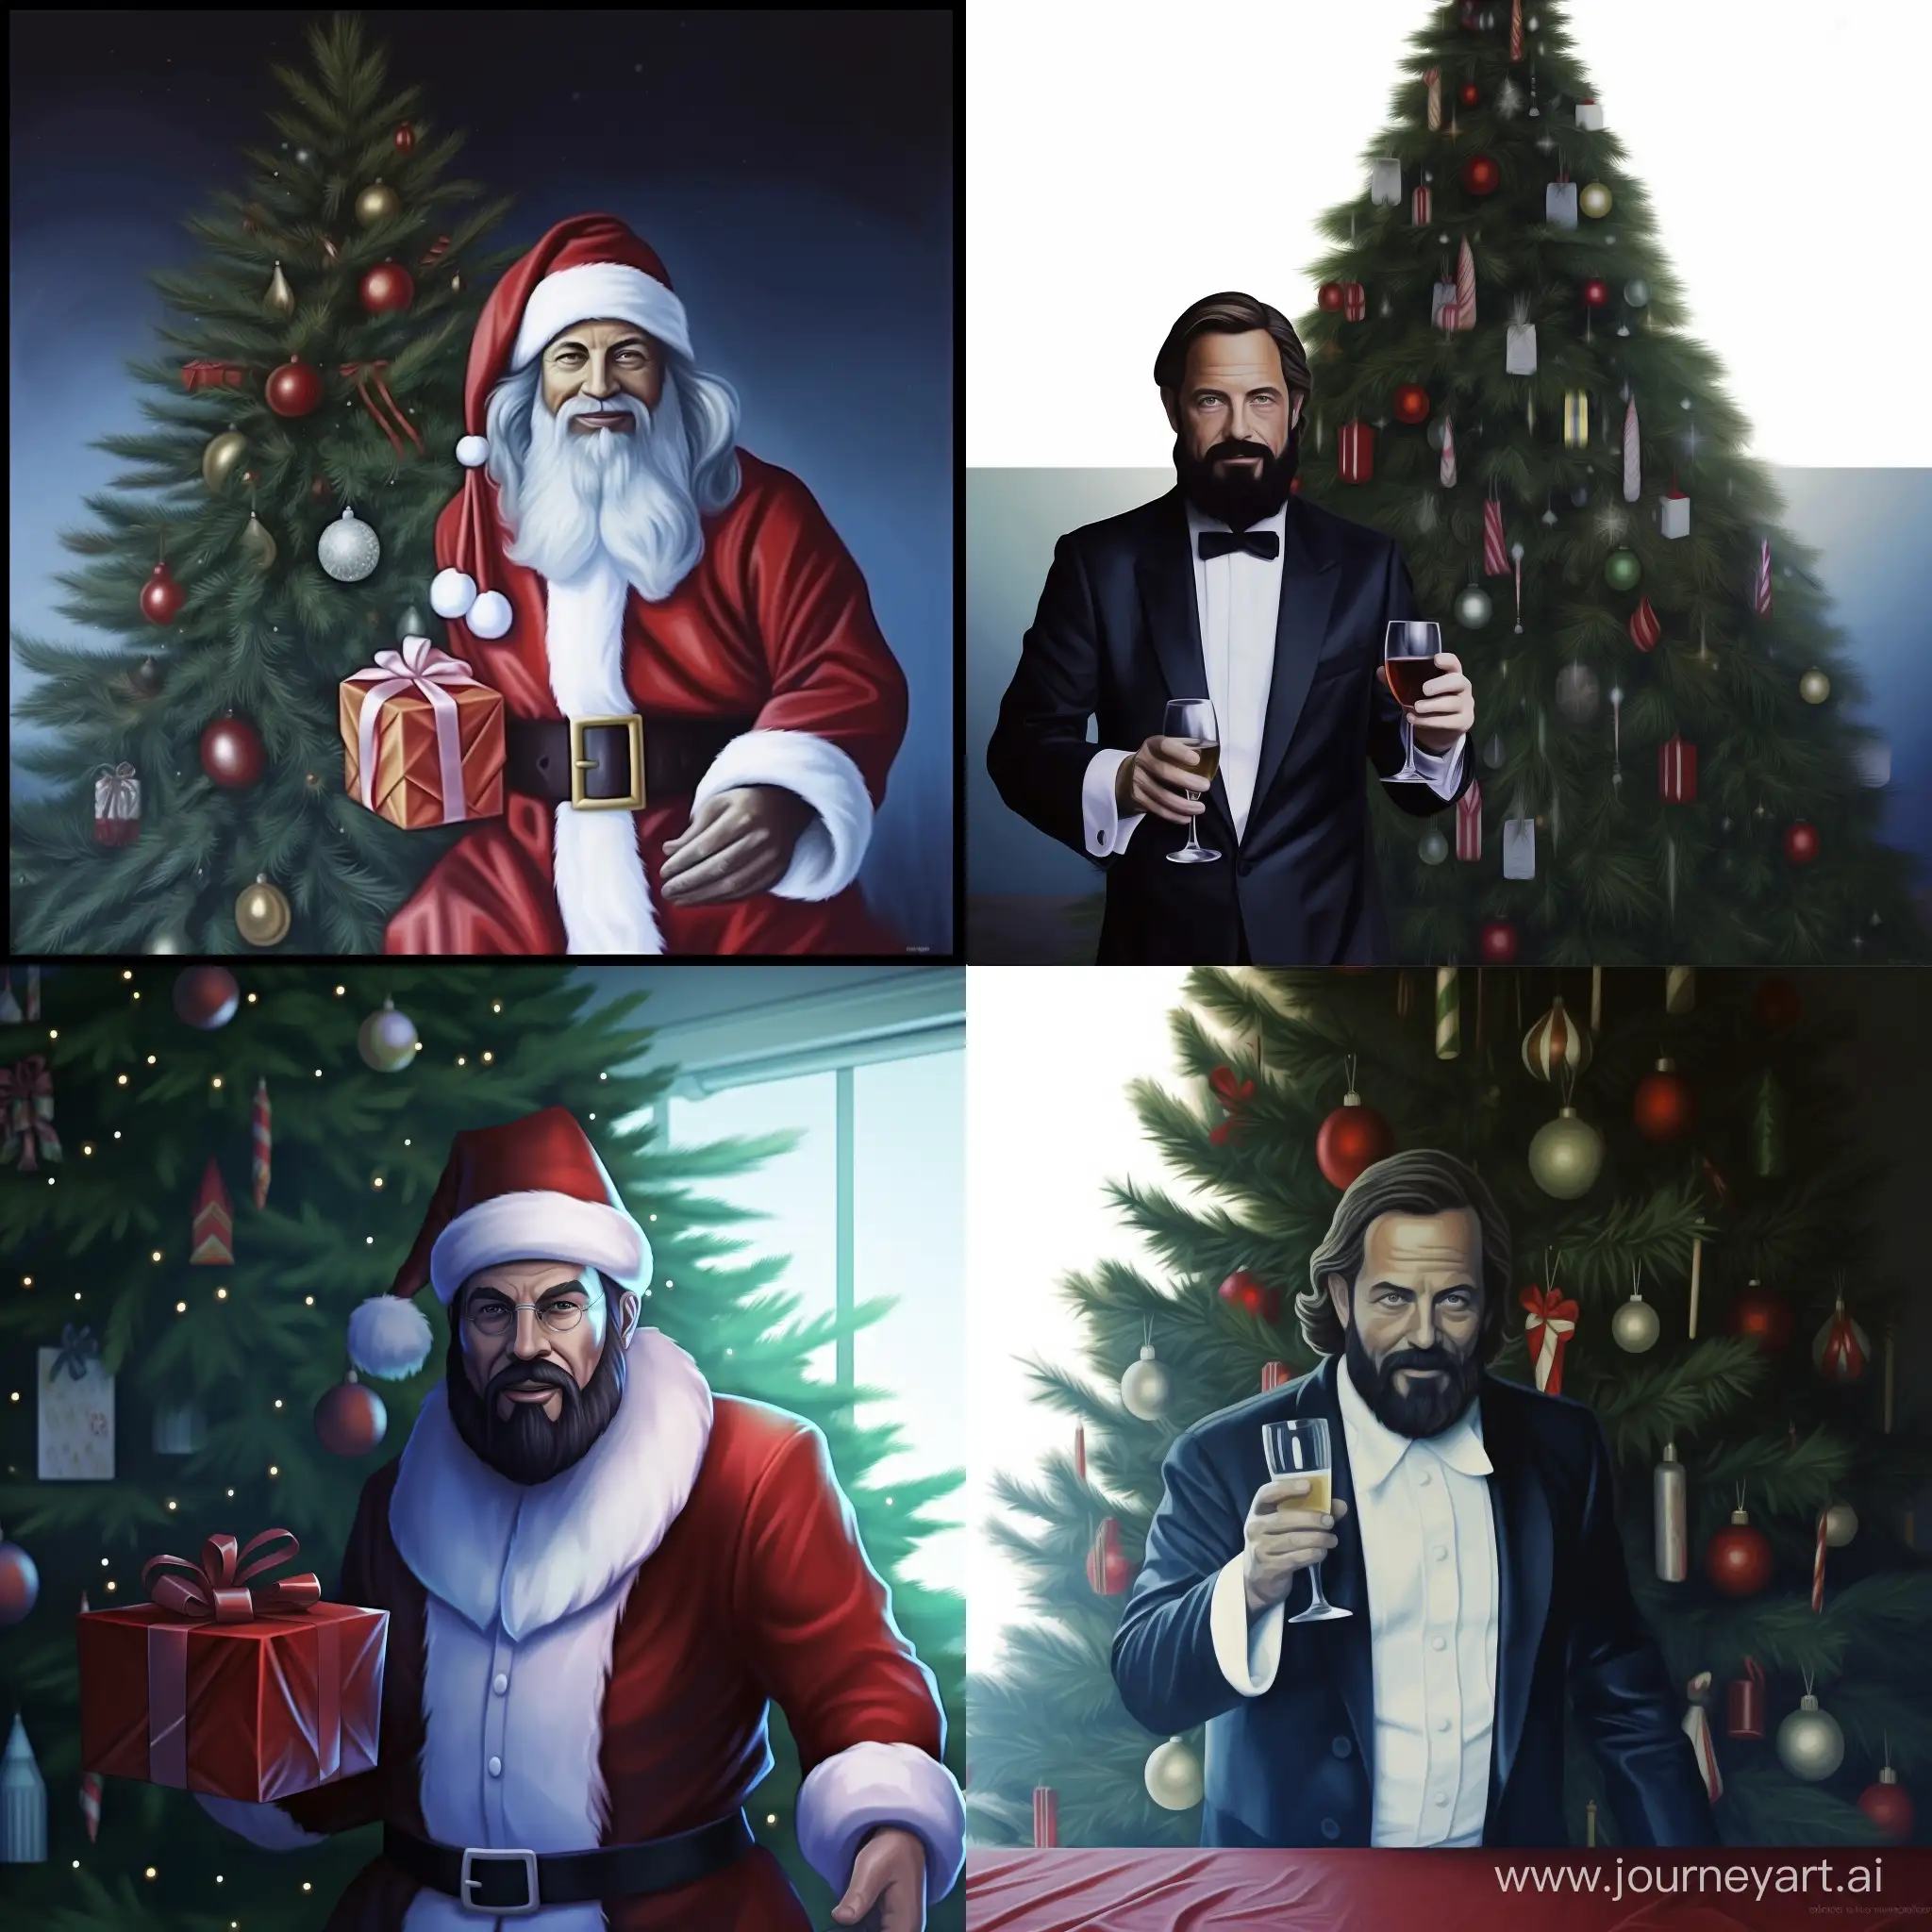 A man with a Guy Fawkes mask, standing by a Christmas tree, a man holding a glass of champagne, Photorealism